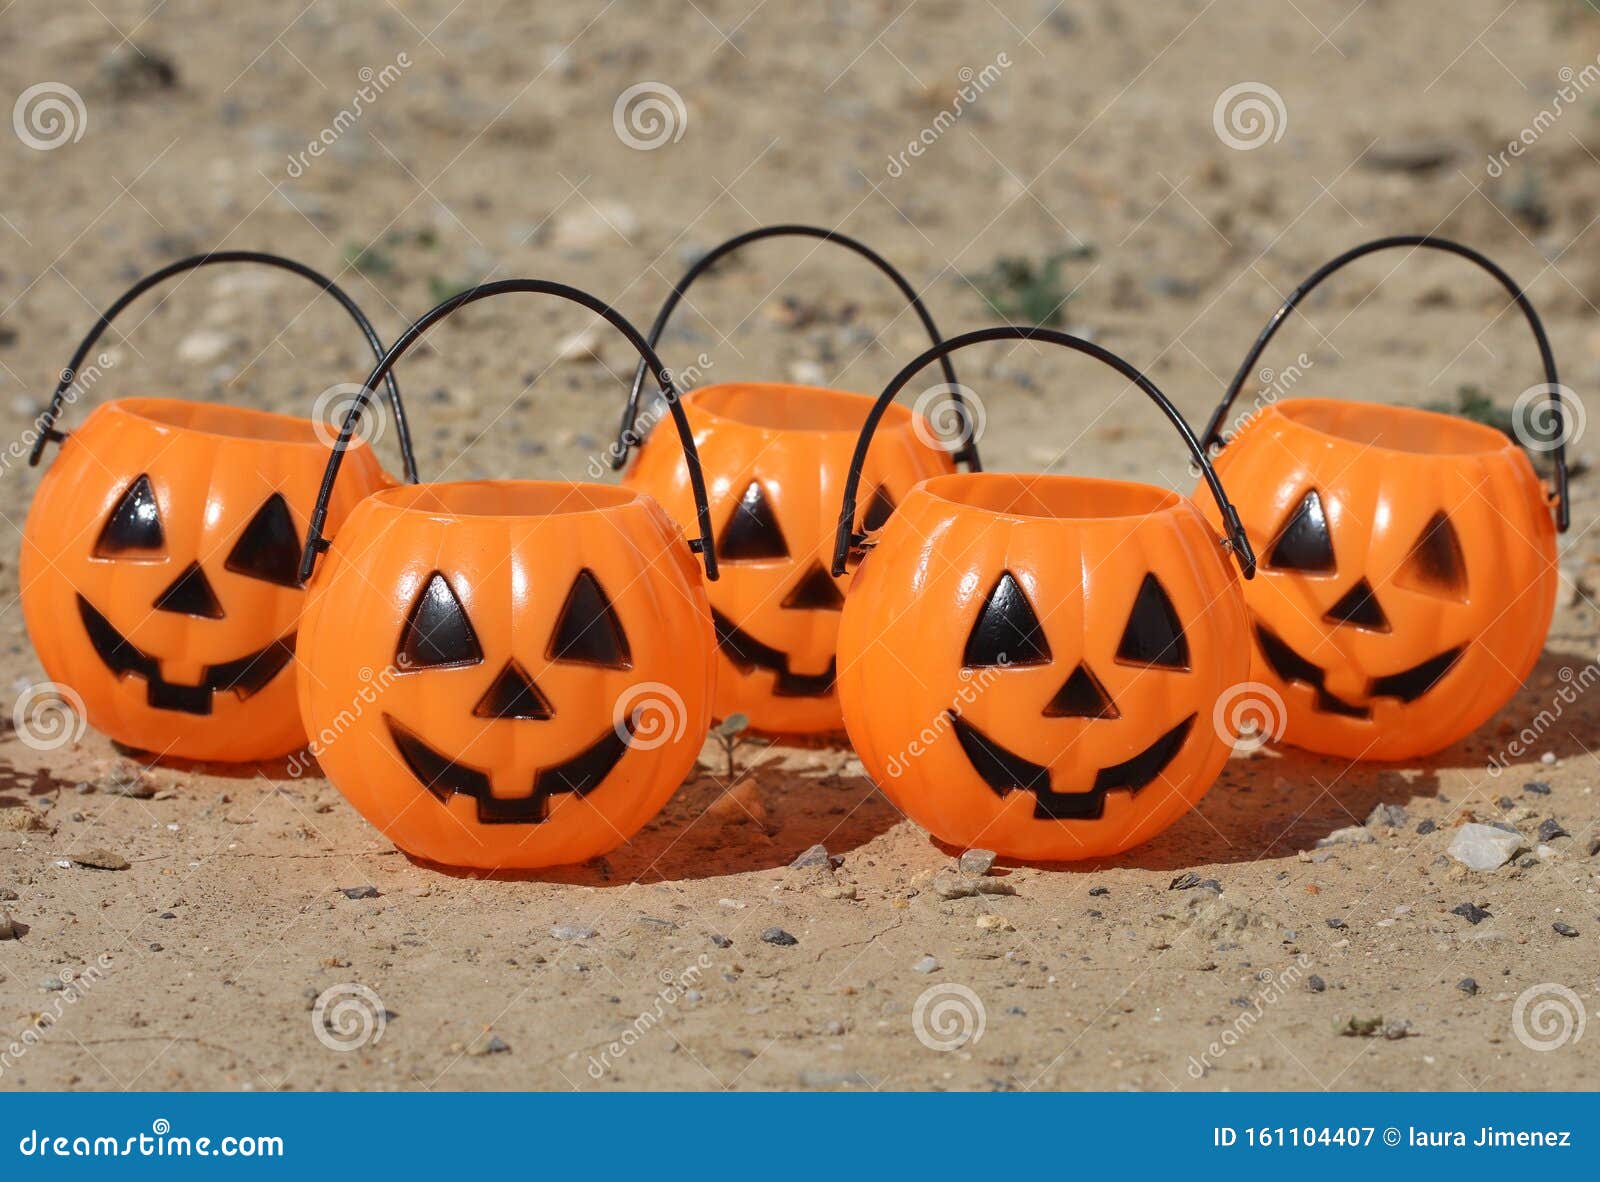 Many Halloween Pumpkins with Scary Faces Looking Forward Stock Image ...